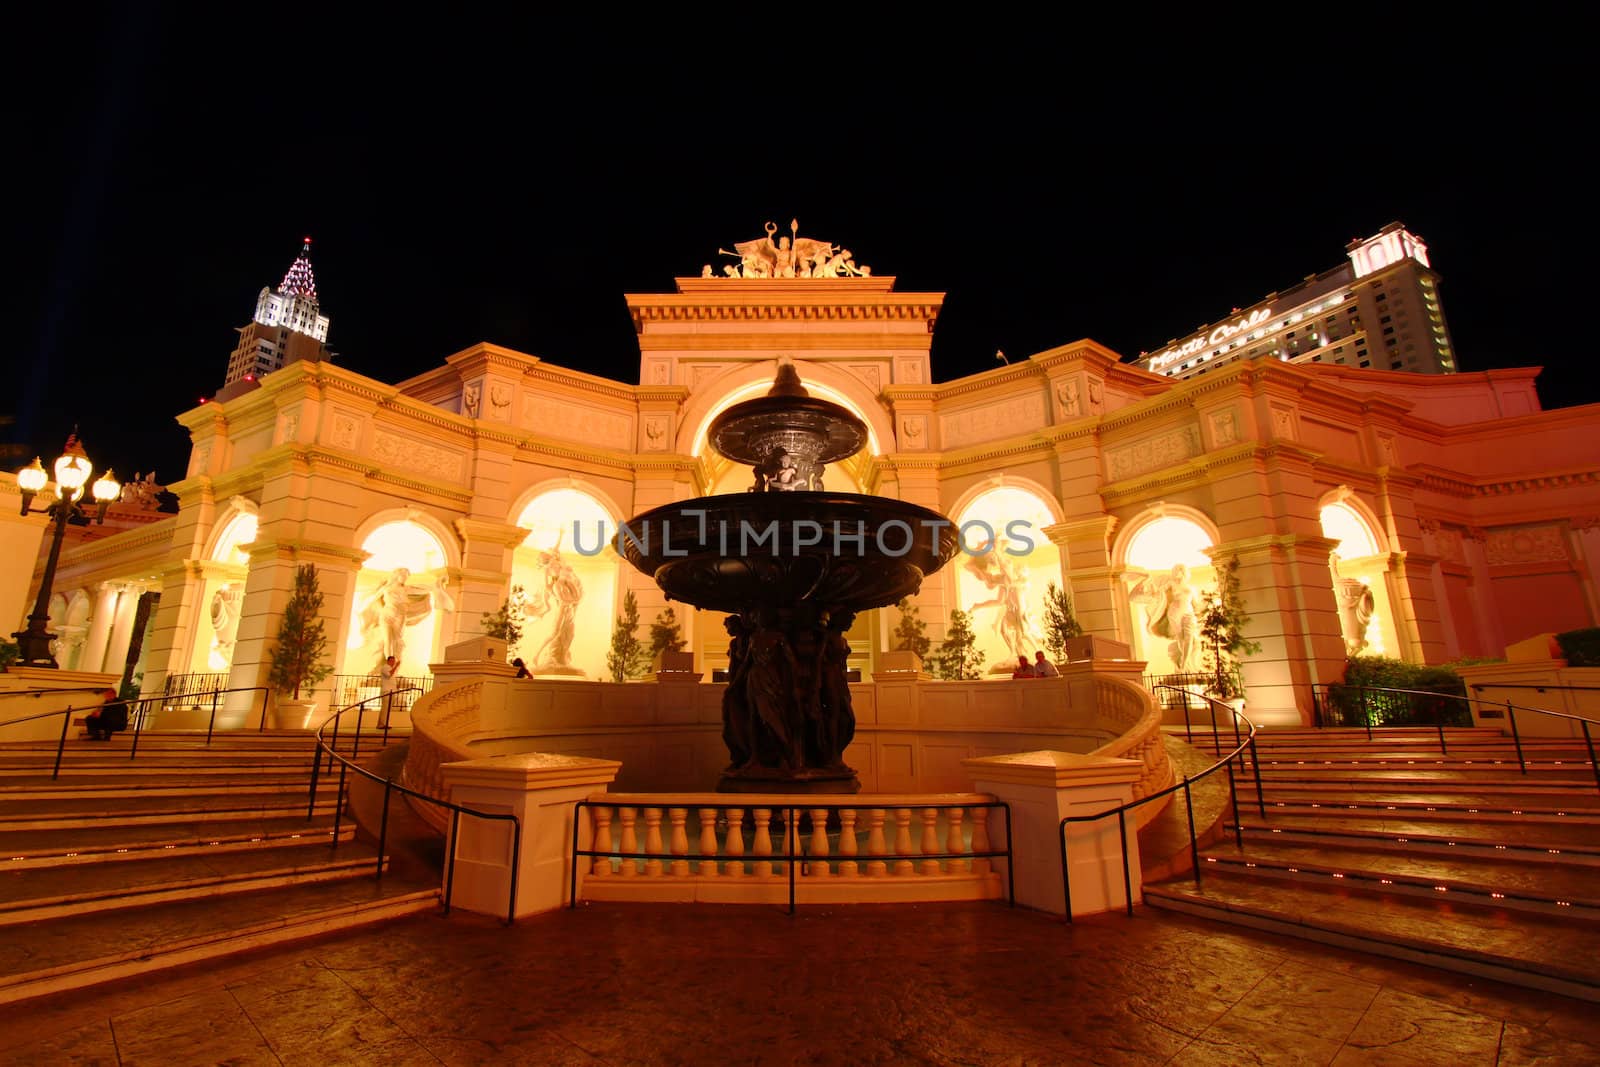 Monte Carlo Resort and Casino by Wirepec